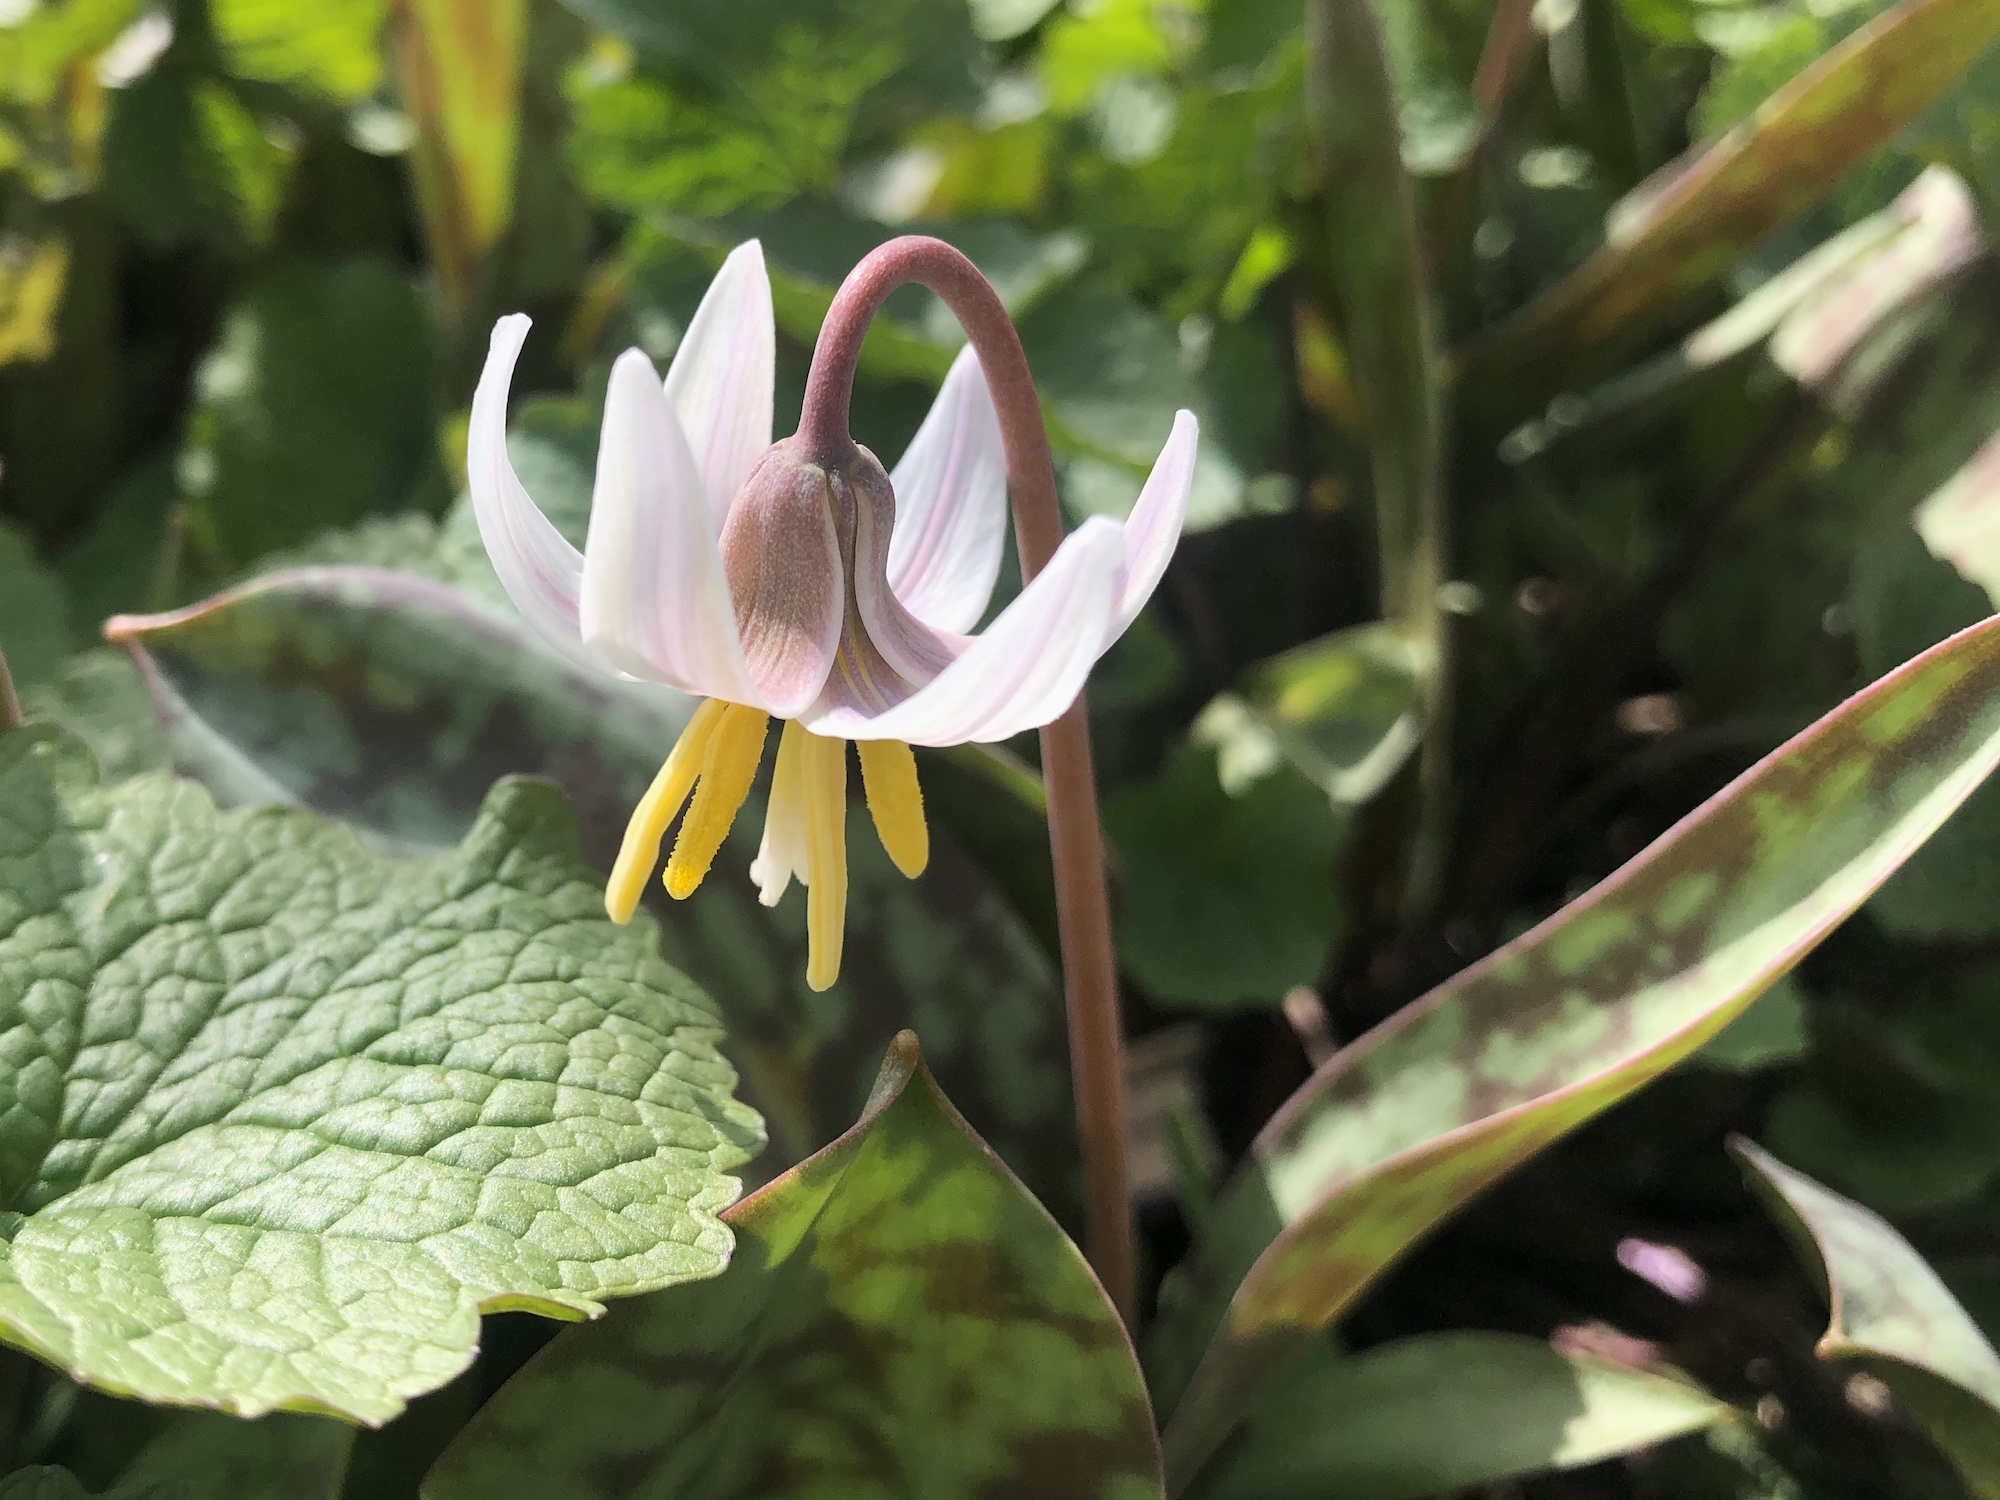 Trout Lily in Oak Savanna by Council Ring in Madison, Wisconsin on April 20, 2020.